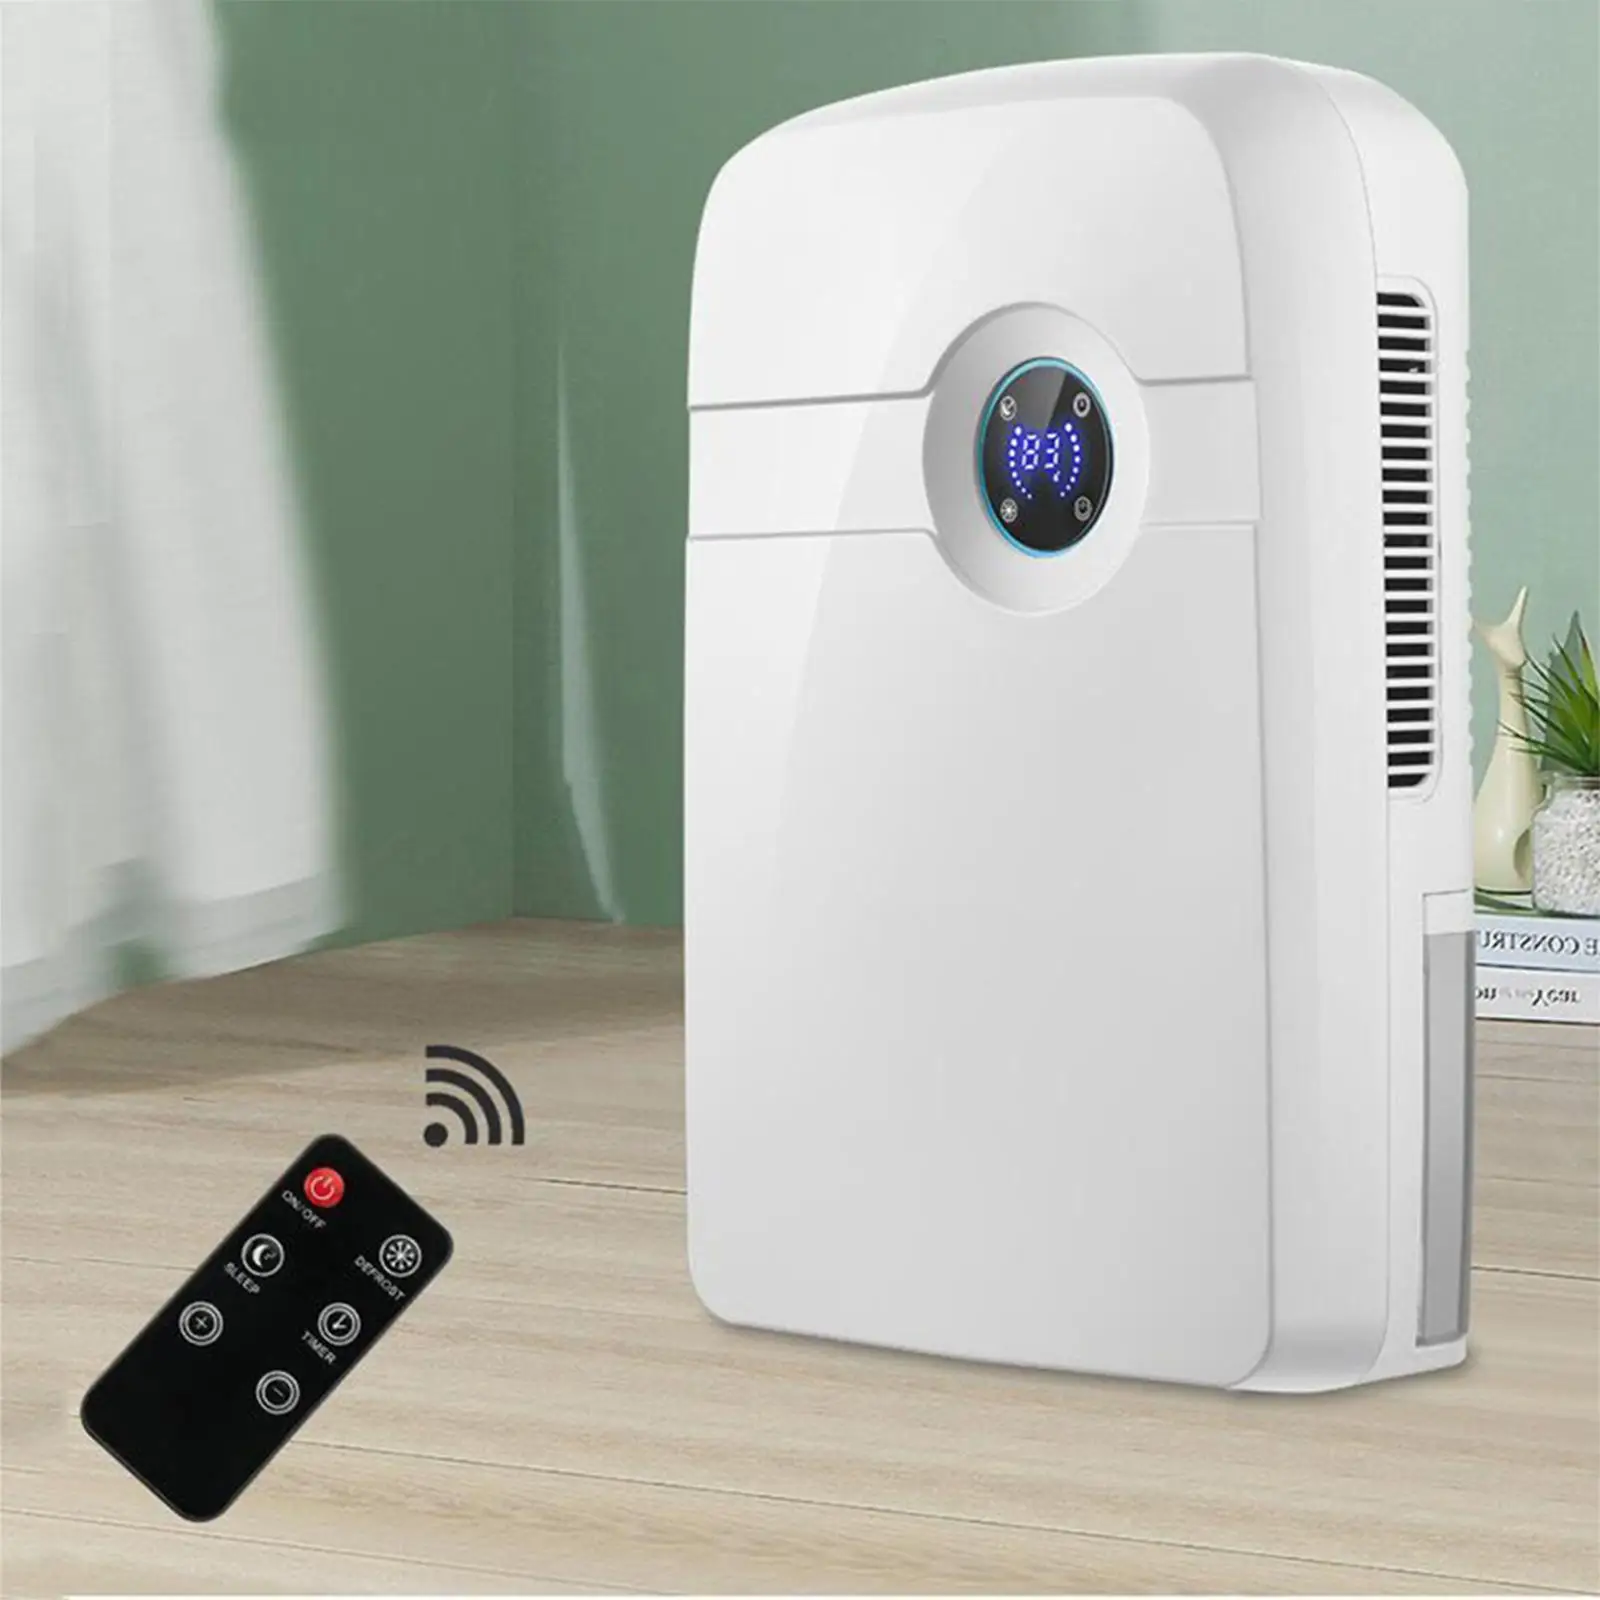 Home Dehumidifier Air Dryer Moisture Absorber  Dryer for Home